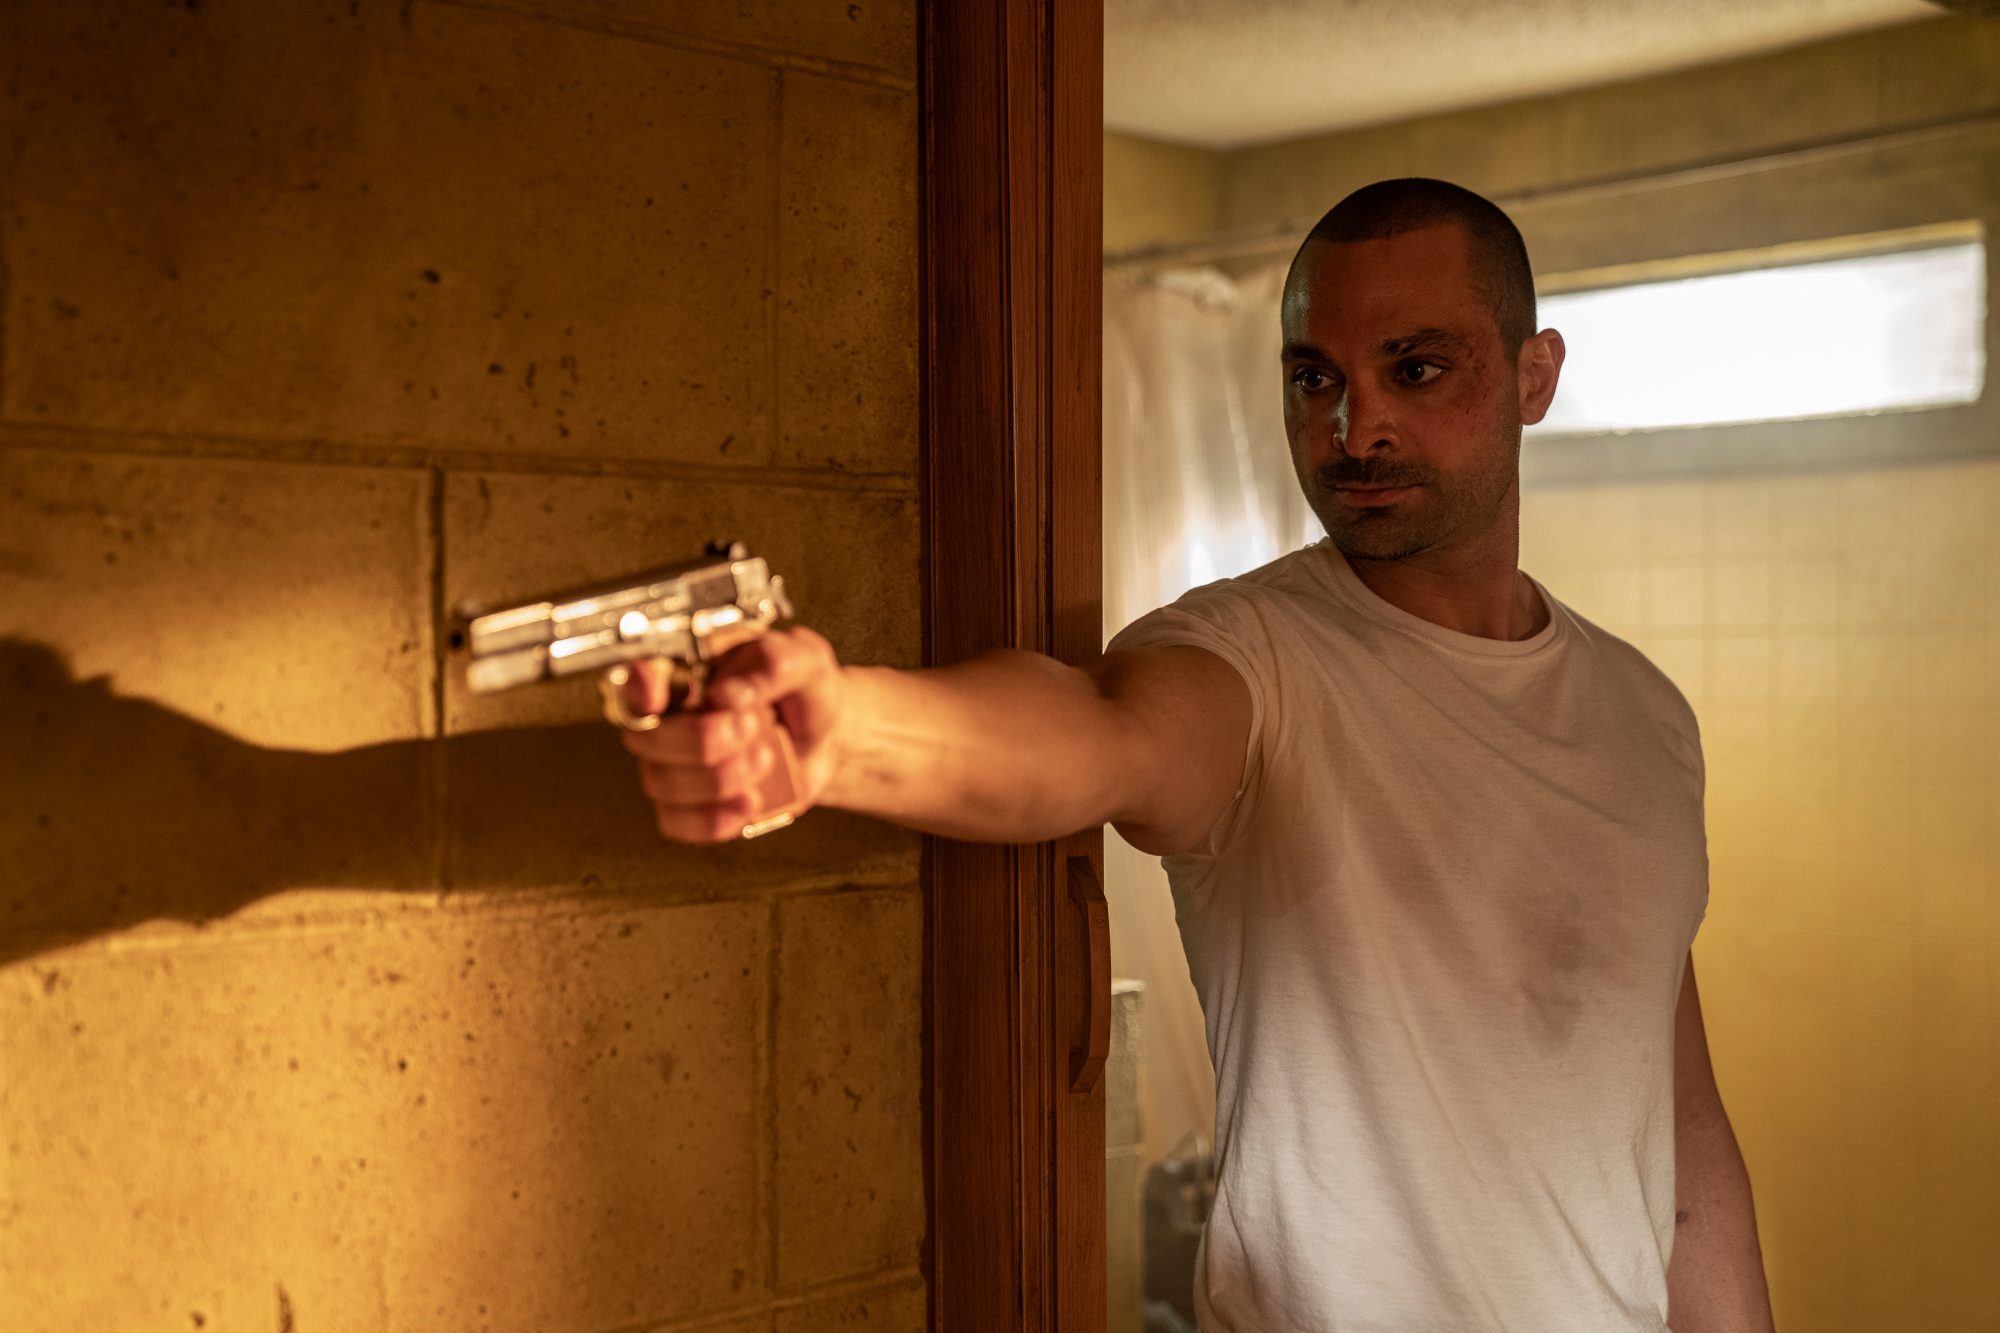 Michael Mando as Nacho Varga in 'Better Call Saul' Season 6 Episode 2. He's standing in a motel and pointing a gun at someone off screen.